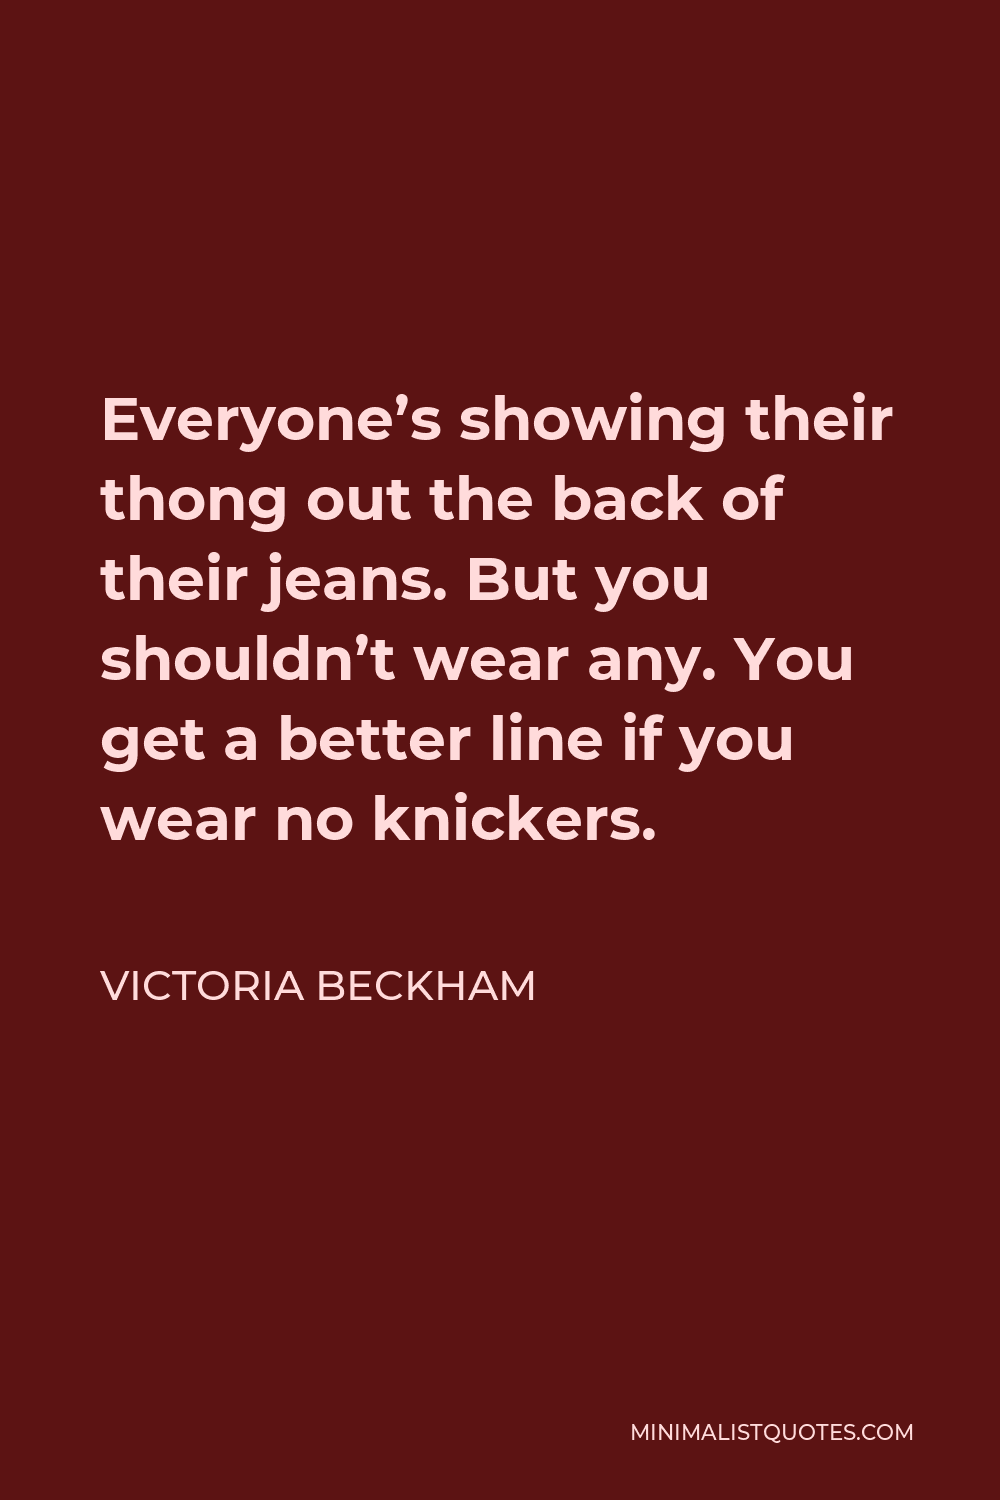 NO KNICKERS QUOTES –